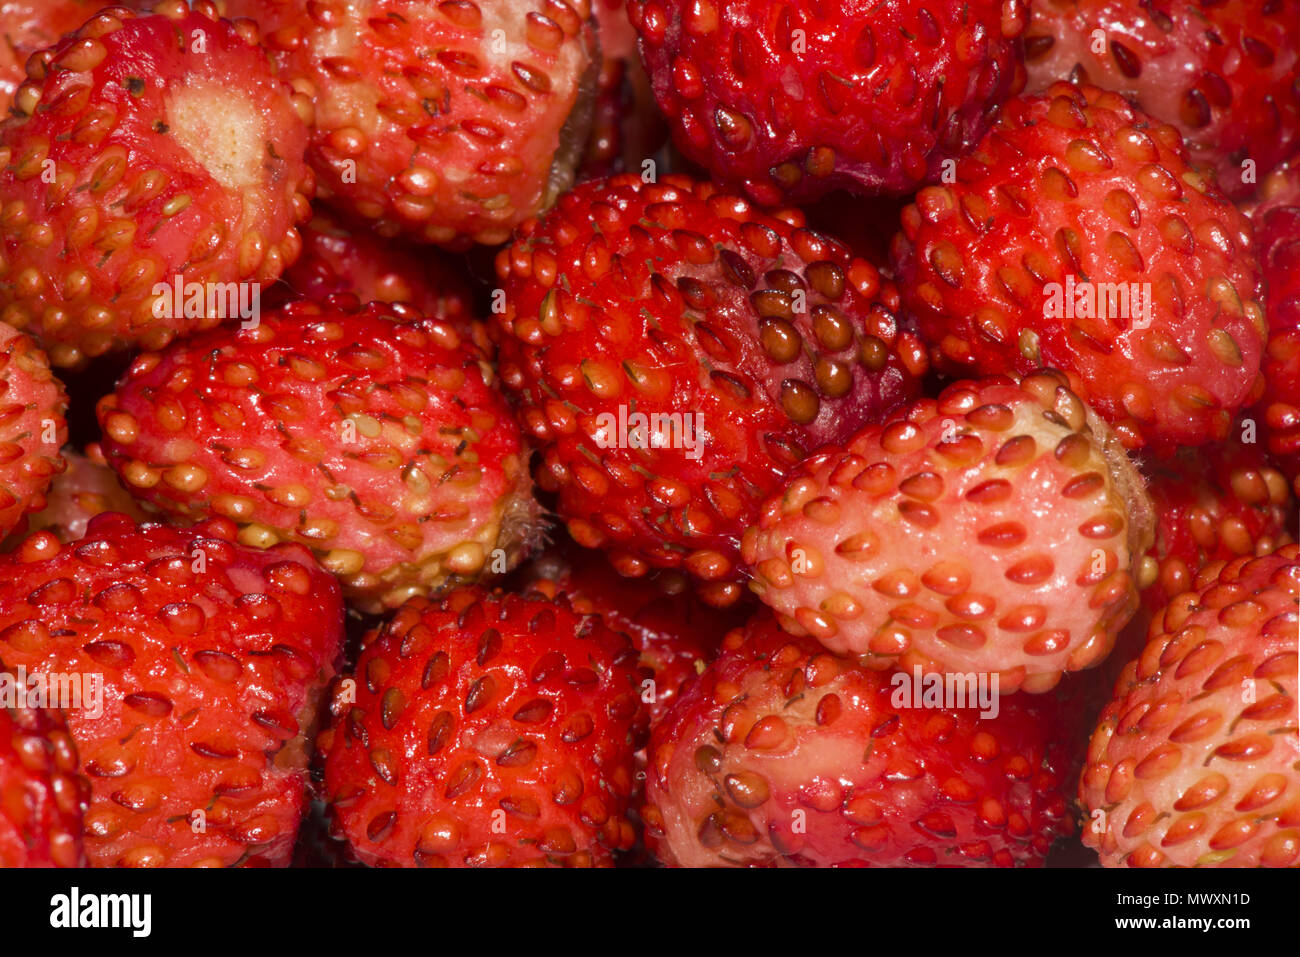 background from freshly harvested wild strawberry (Fragaria vesca) Stock Photo